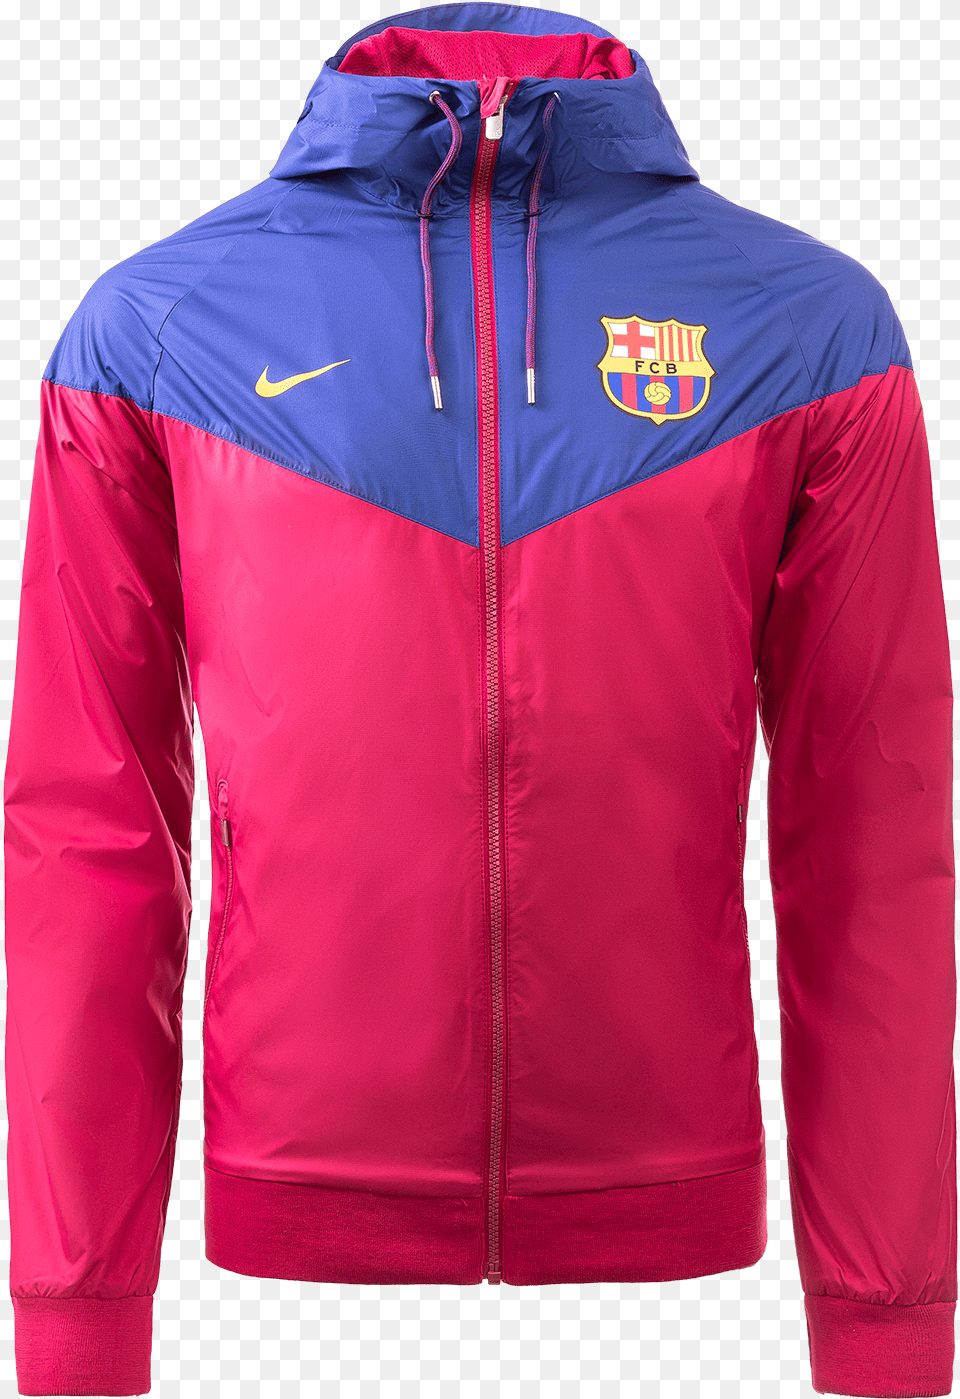 Fc Barcelona Nsw Authentic Woven Windrunner Barcelona Windrunner Red And Blue, Clothing, Coat, Jacket Png